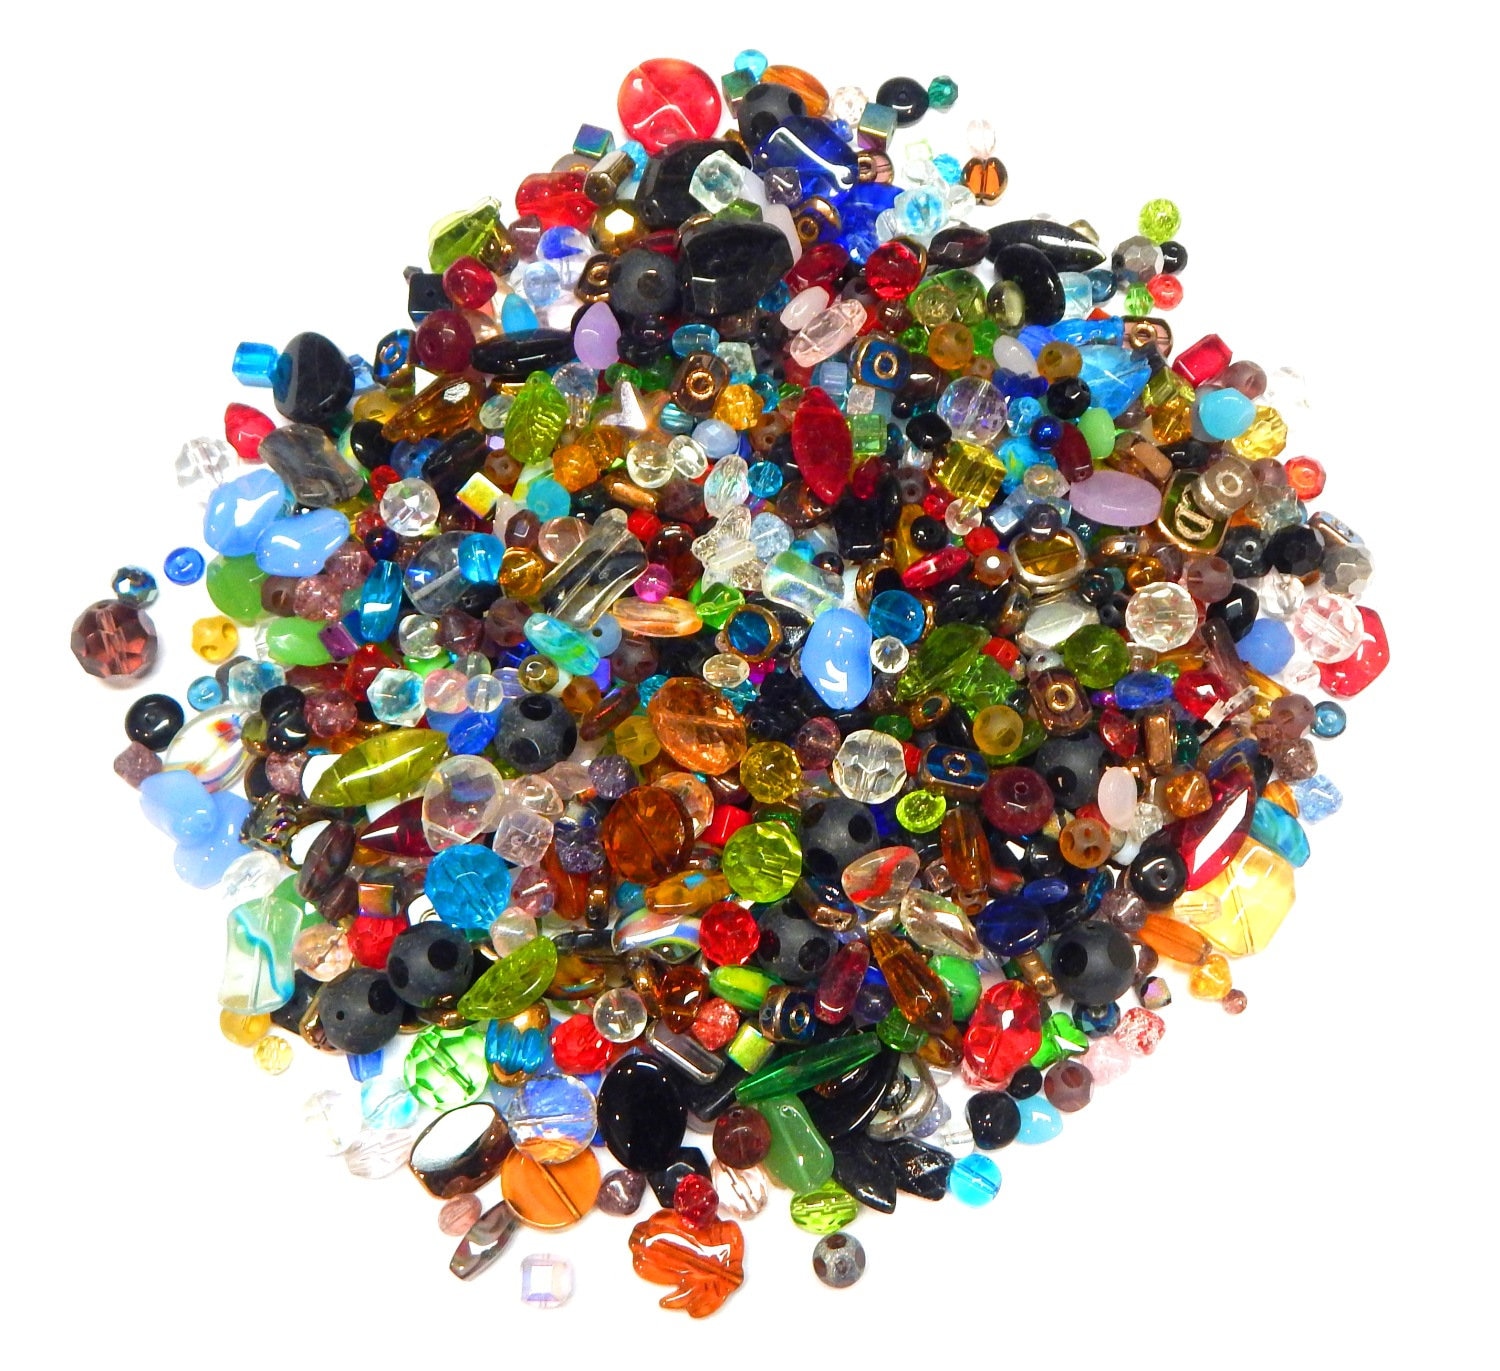 Crystal Glass Beads for Jewelry Making, 500 Pcs Assorted Crystal Beads  Bulk, Mixed Glass Beads, Iridescent Faceted Beads for  Crafts(4/6/8mm,ABColor)